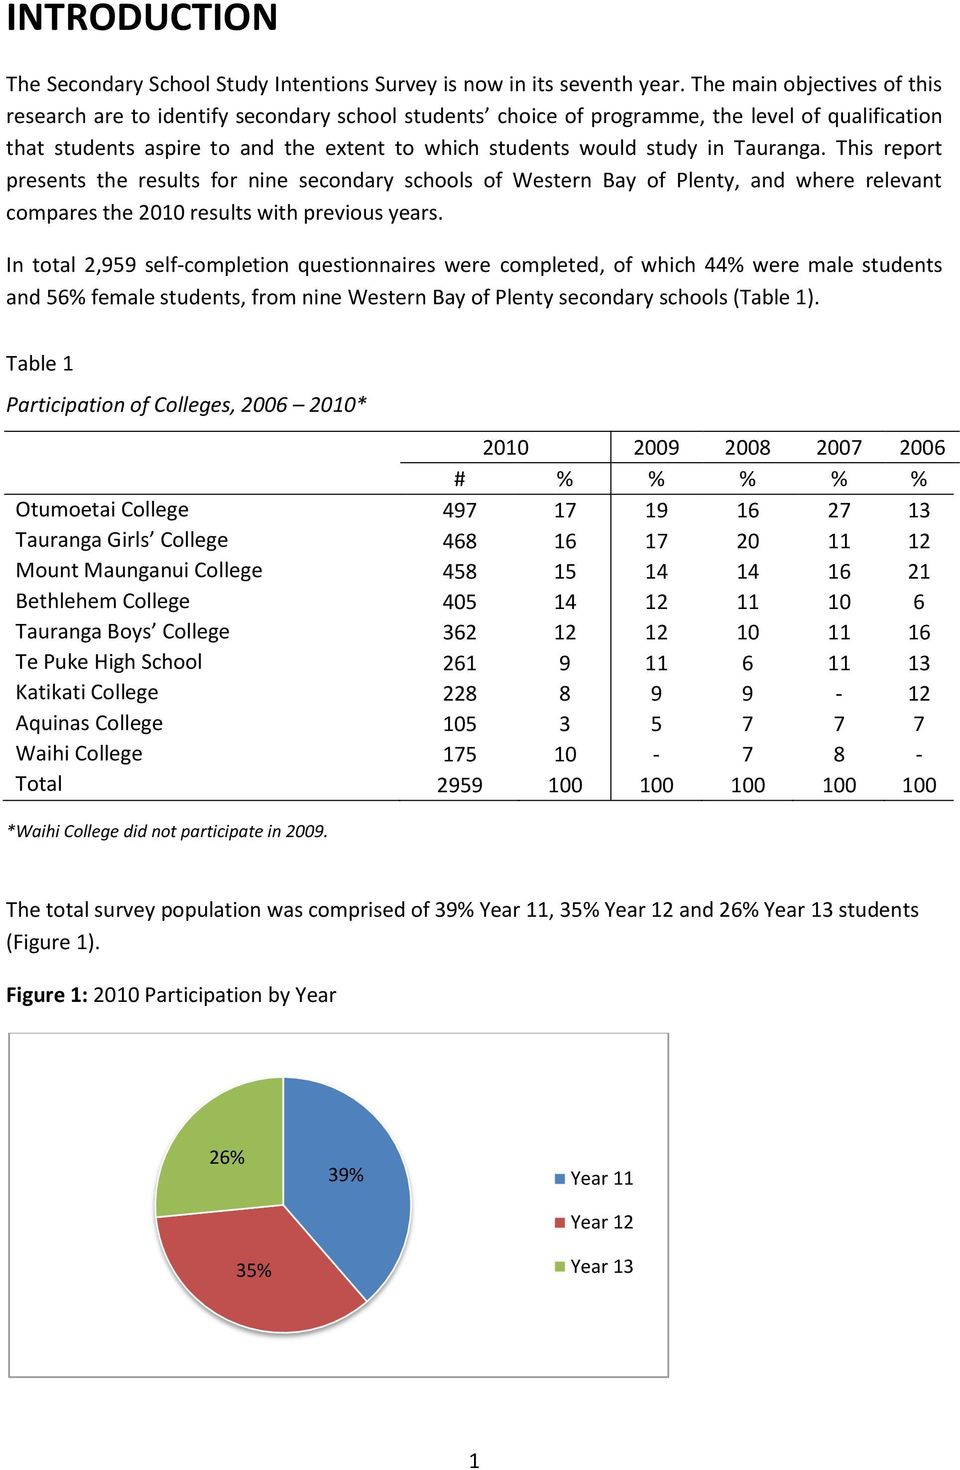 Tauranga. This report presents the results for nine secondary schools of Western Bay of Plenty, and where relevant compares the 2010 results with previous years.